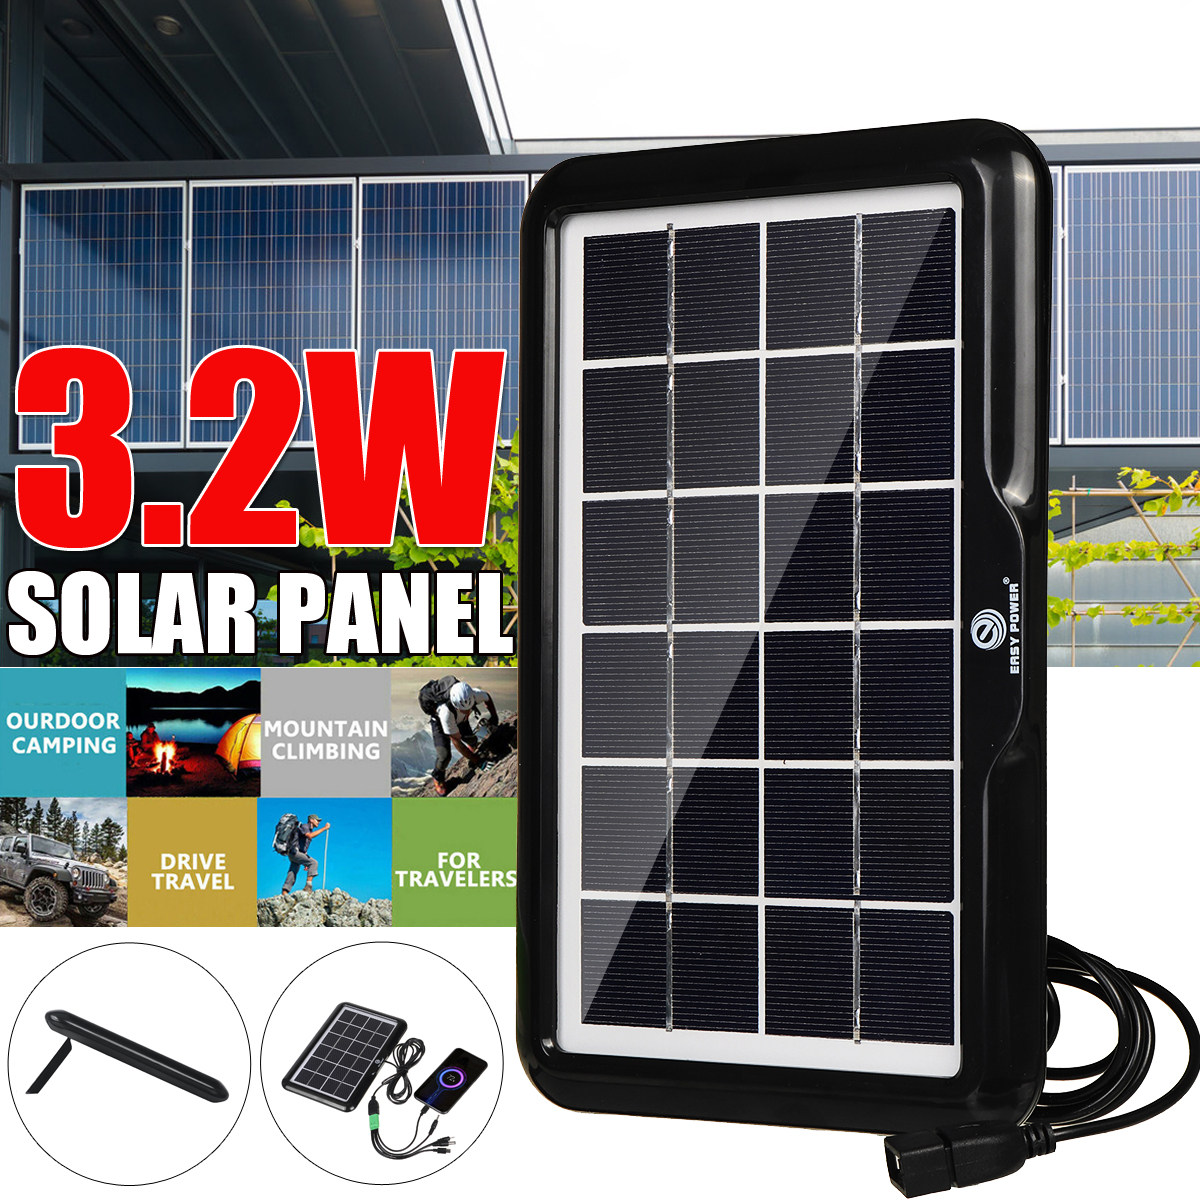 32W-Portable-Outdoor-Solar-Panel-Polycrystalline-Silicon-Solar-Panel-With-Interface-Mobile-Phone-Fan-1928784-1